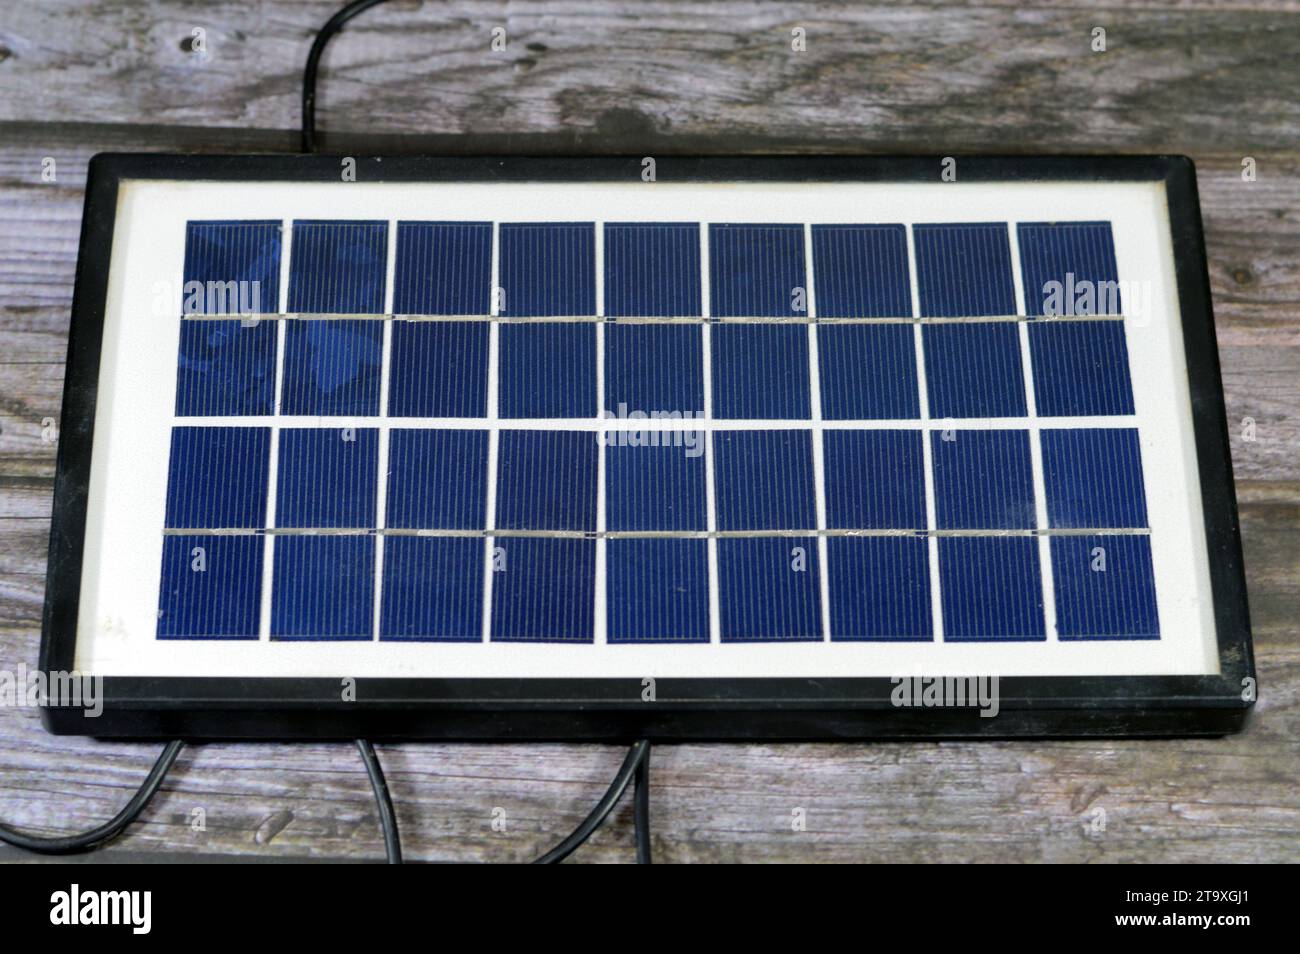 A solar panel, a device that converts sunlight into electricity by using photovoltaic (PV) cells which made of materials that generate electrons when Stock Photo